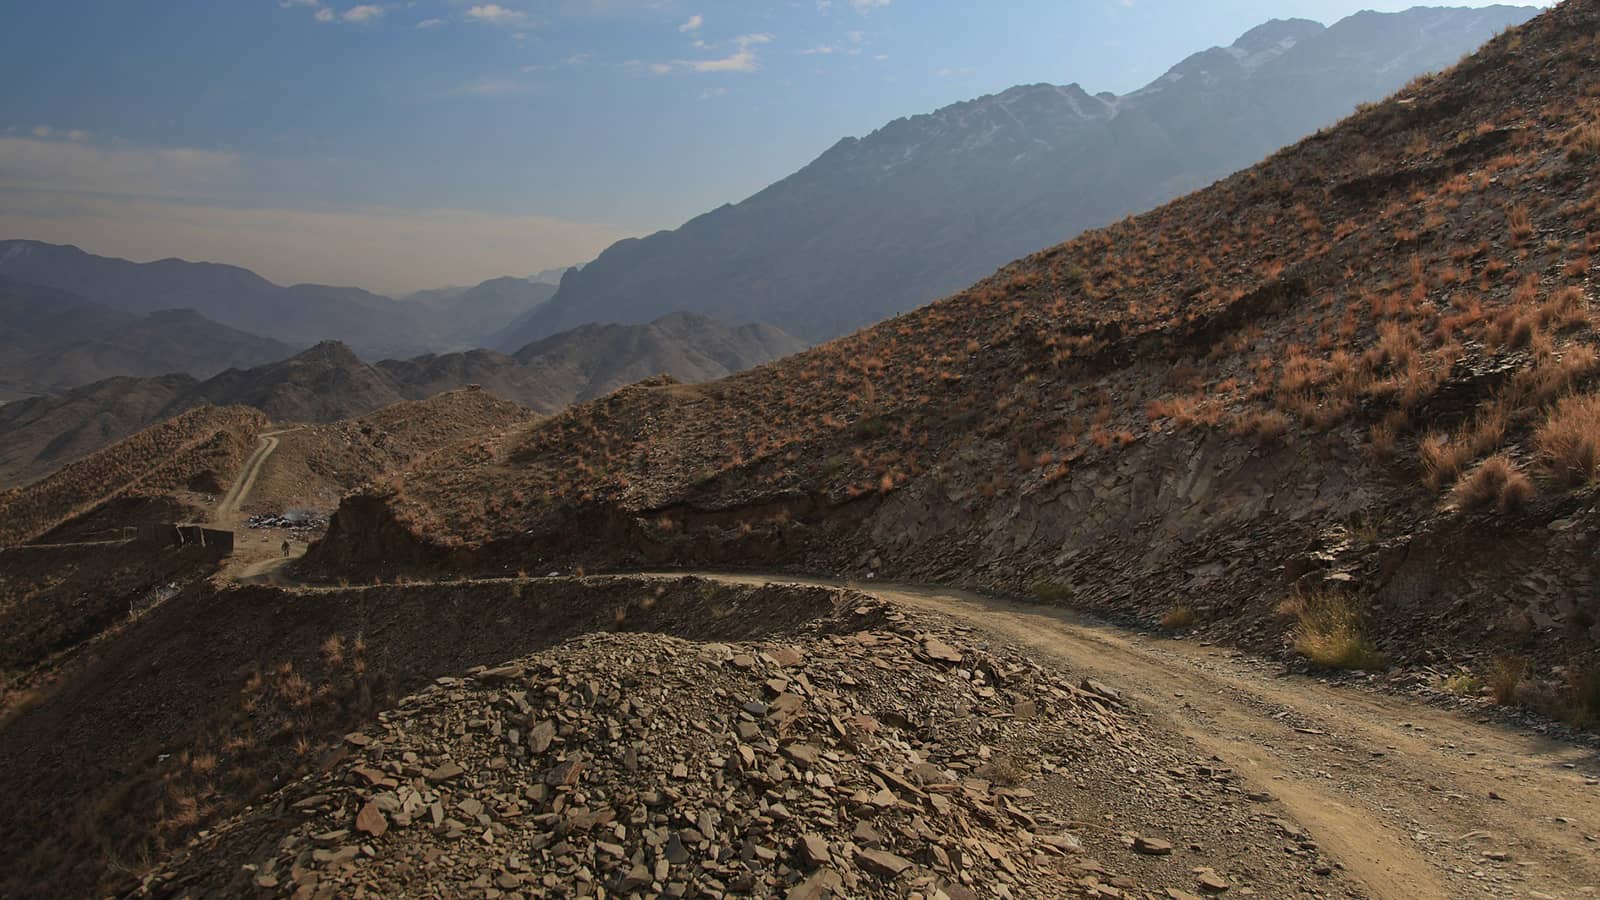 A photo of a remote road in Afghanistan.